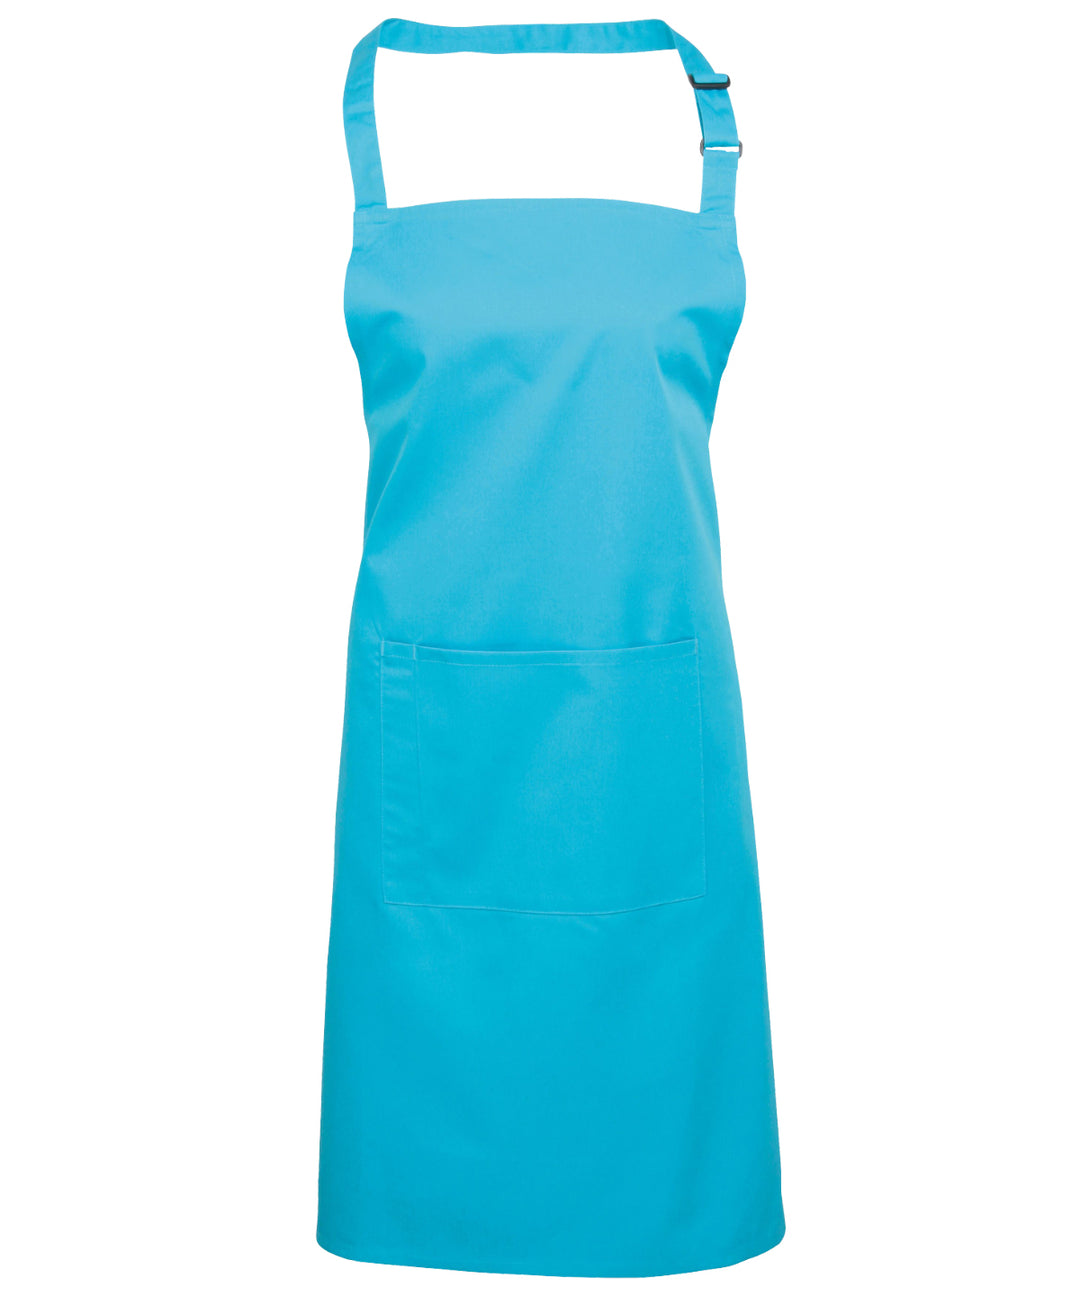 a bright blue apron with straps on a white background